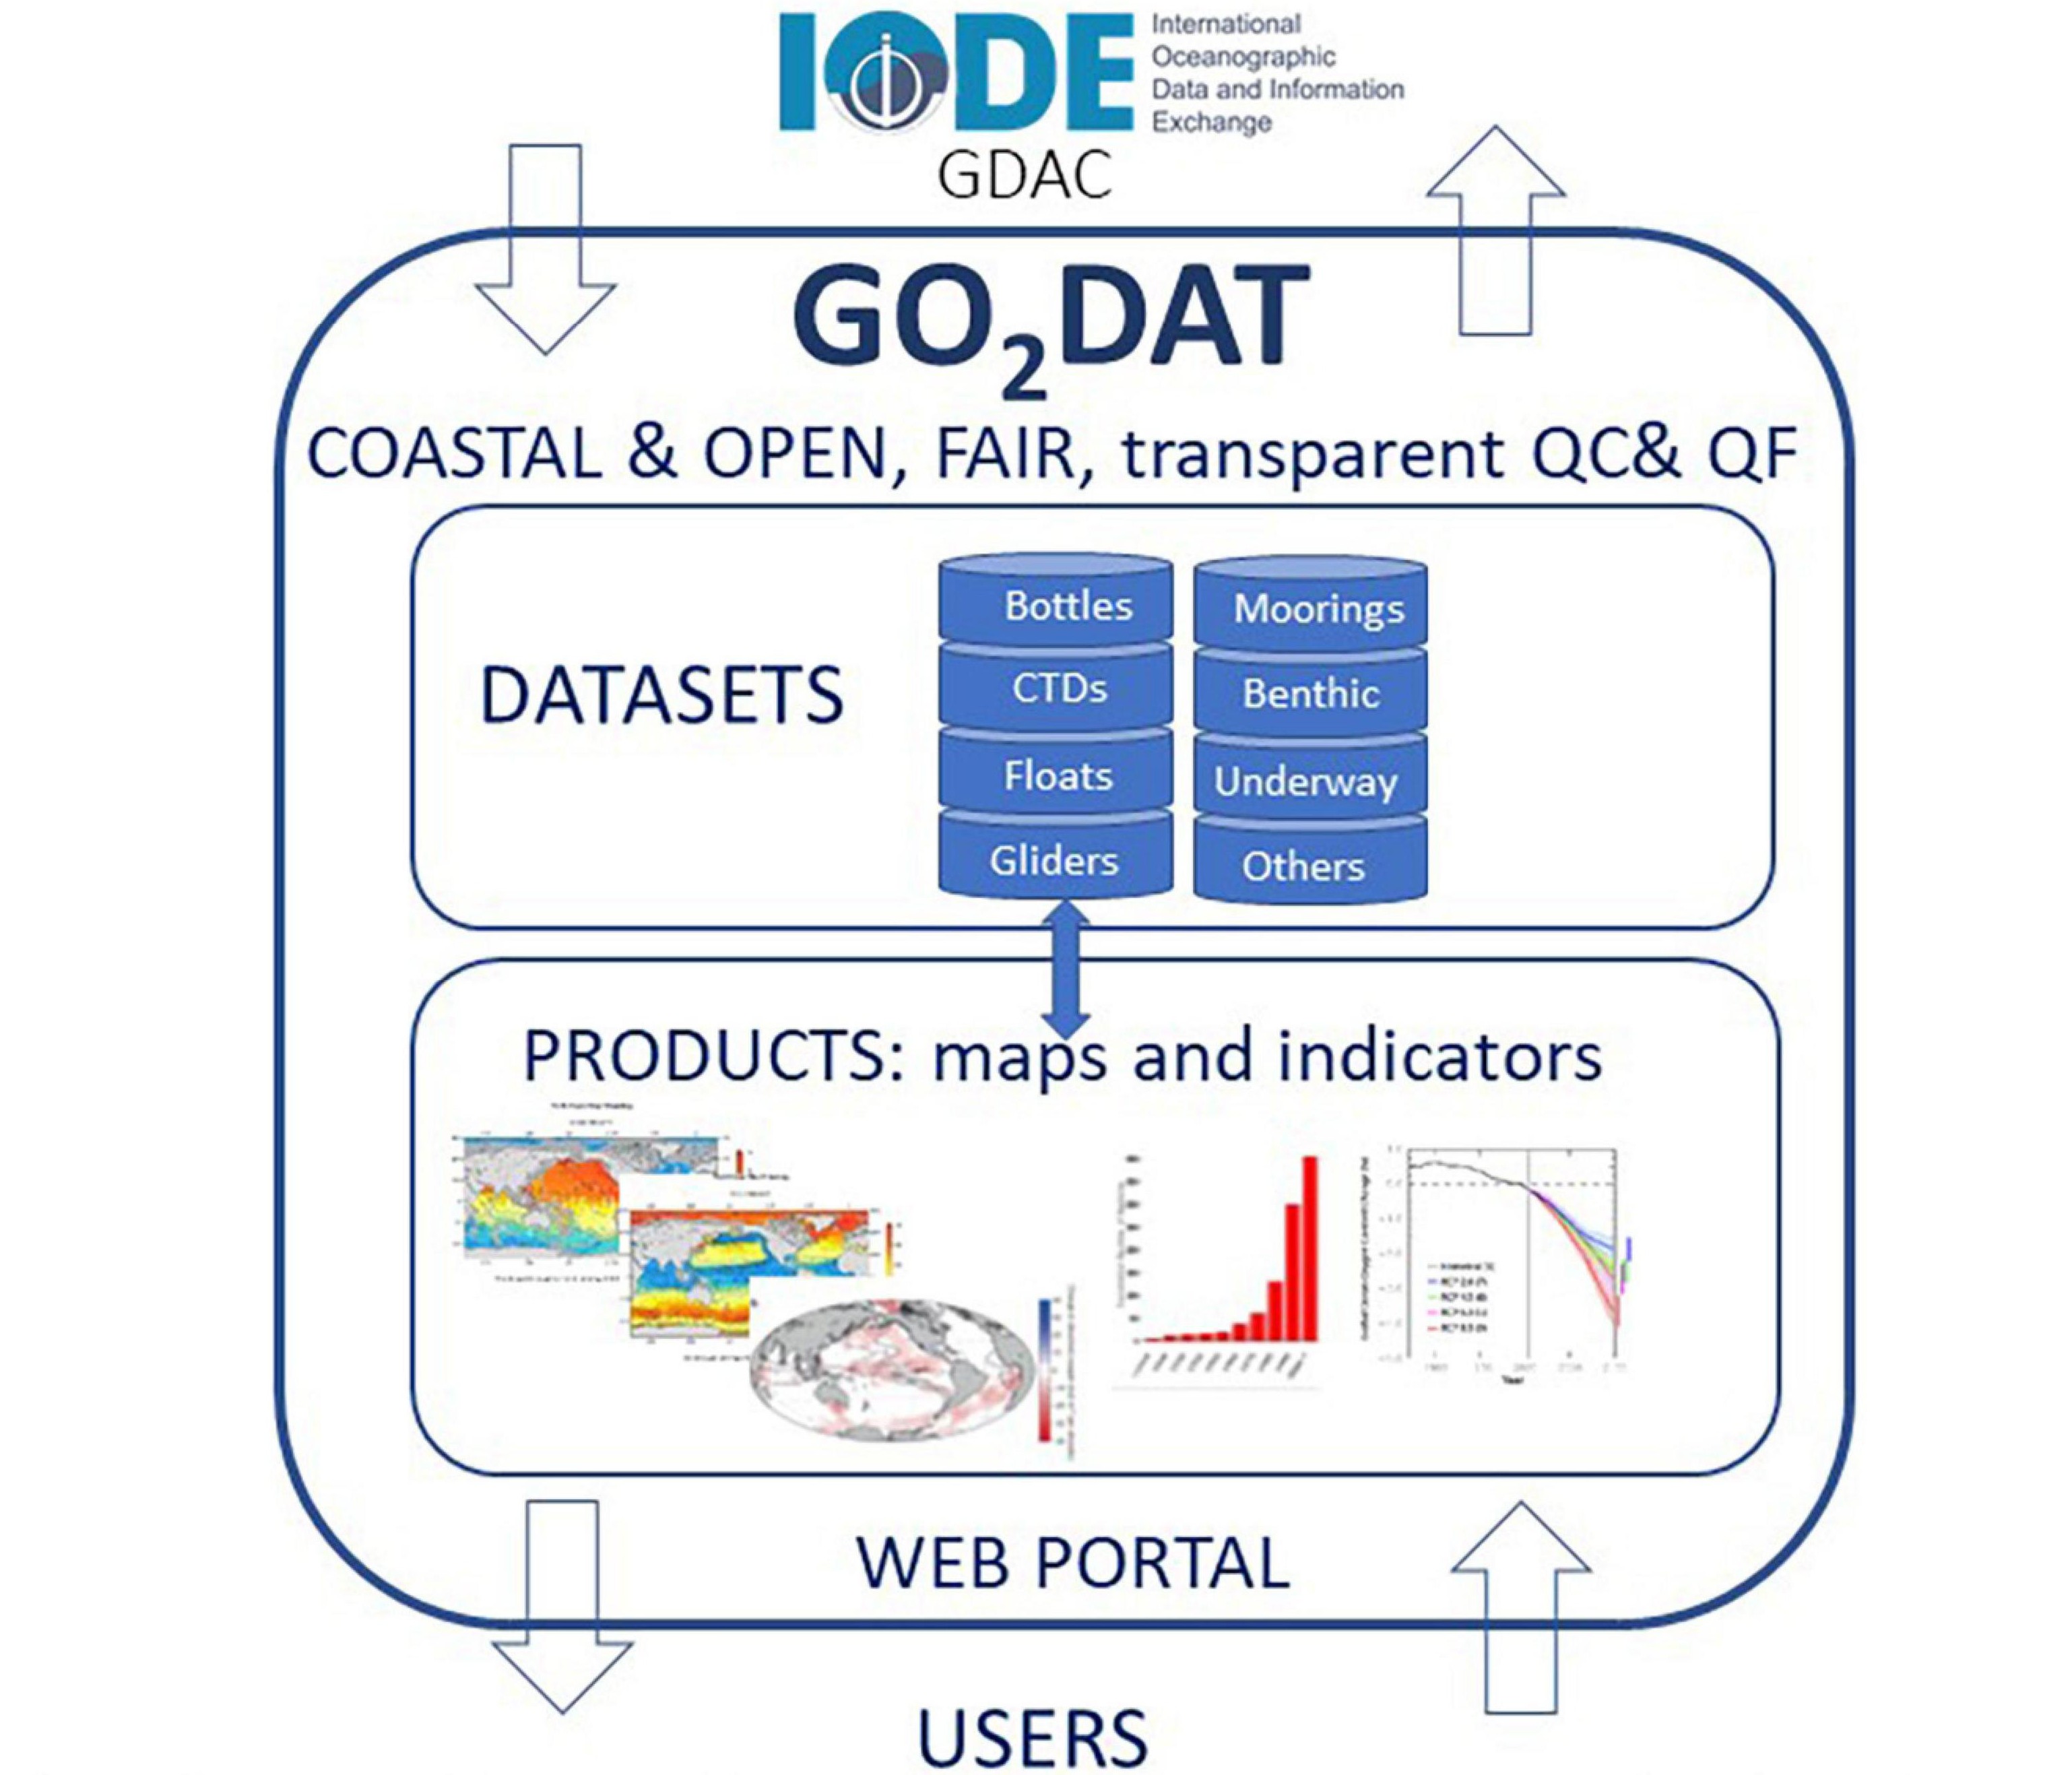  Roadmap for an open-access Global Ocean Oxygen Database and ATlas (GO2DAT) published